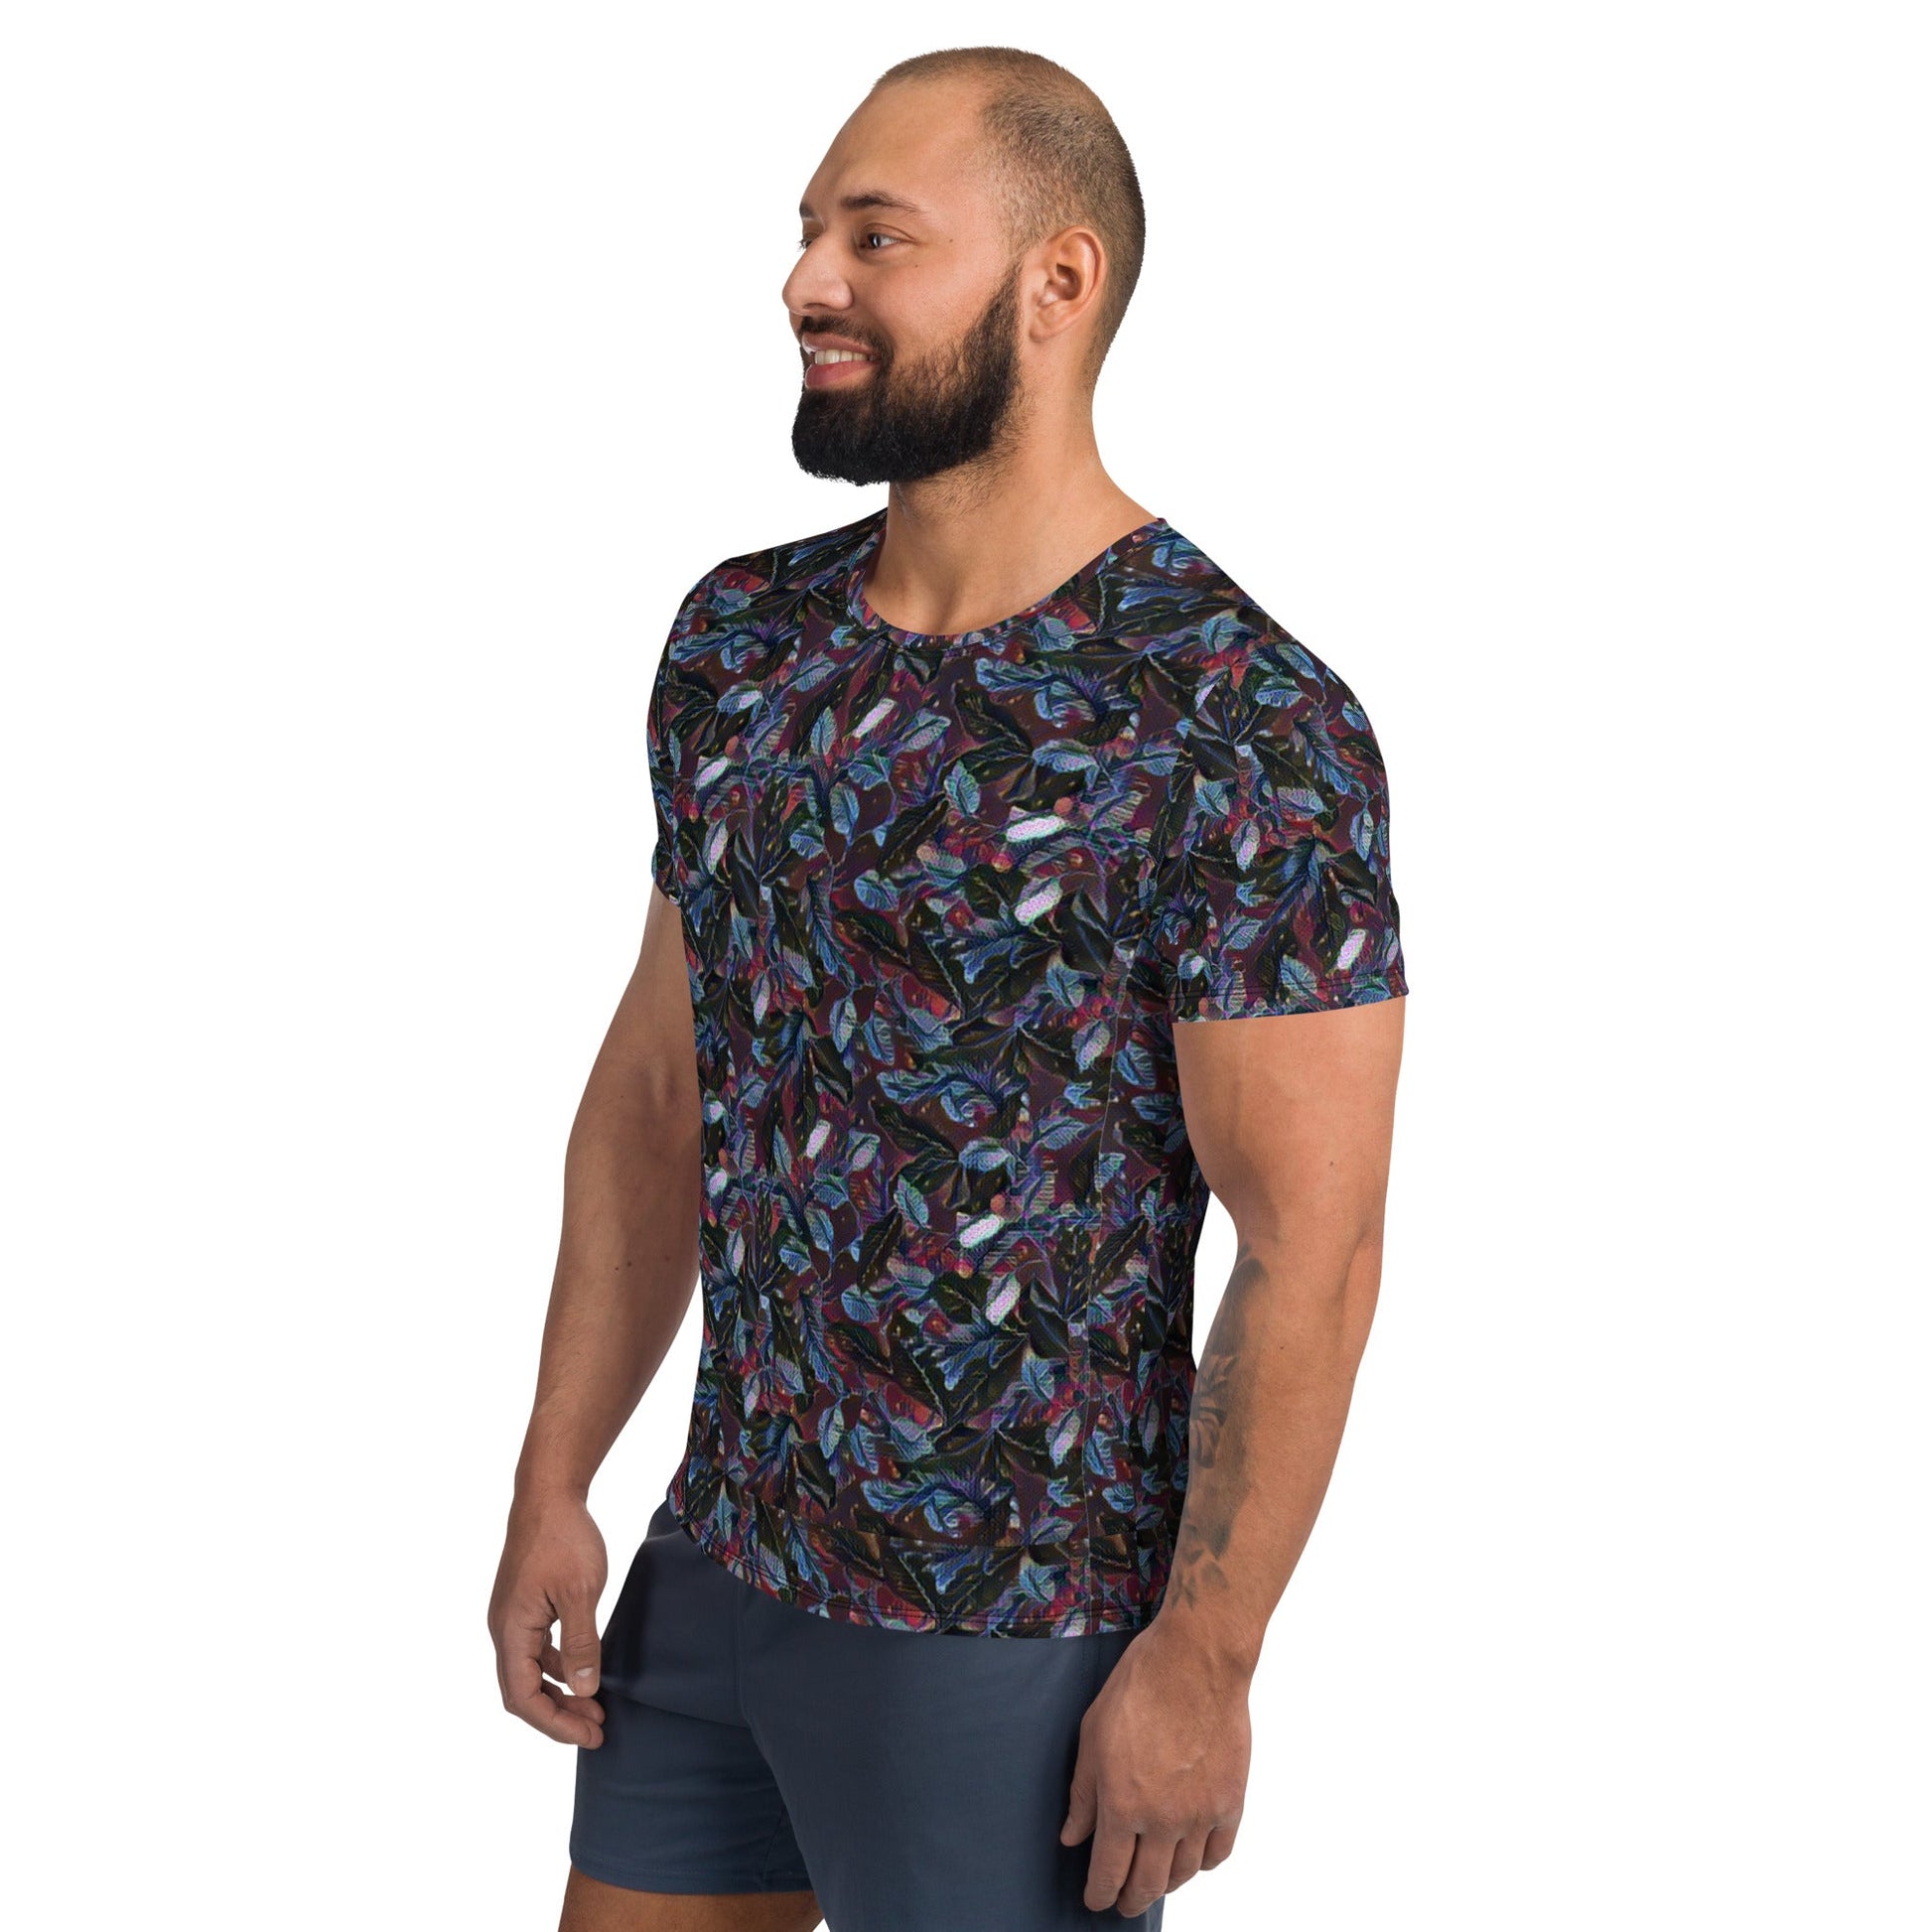 Be Extra Floral Men's Athletic T-shirt - BeExtra! Apparel & More